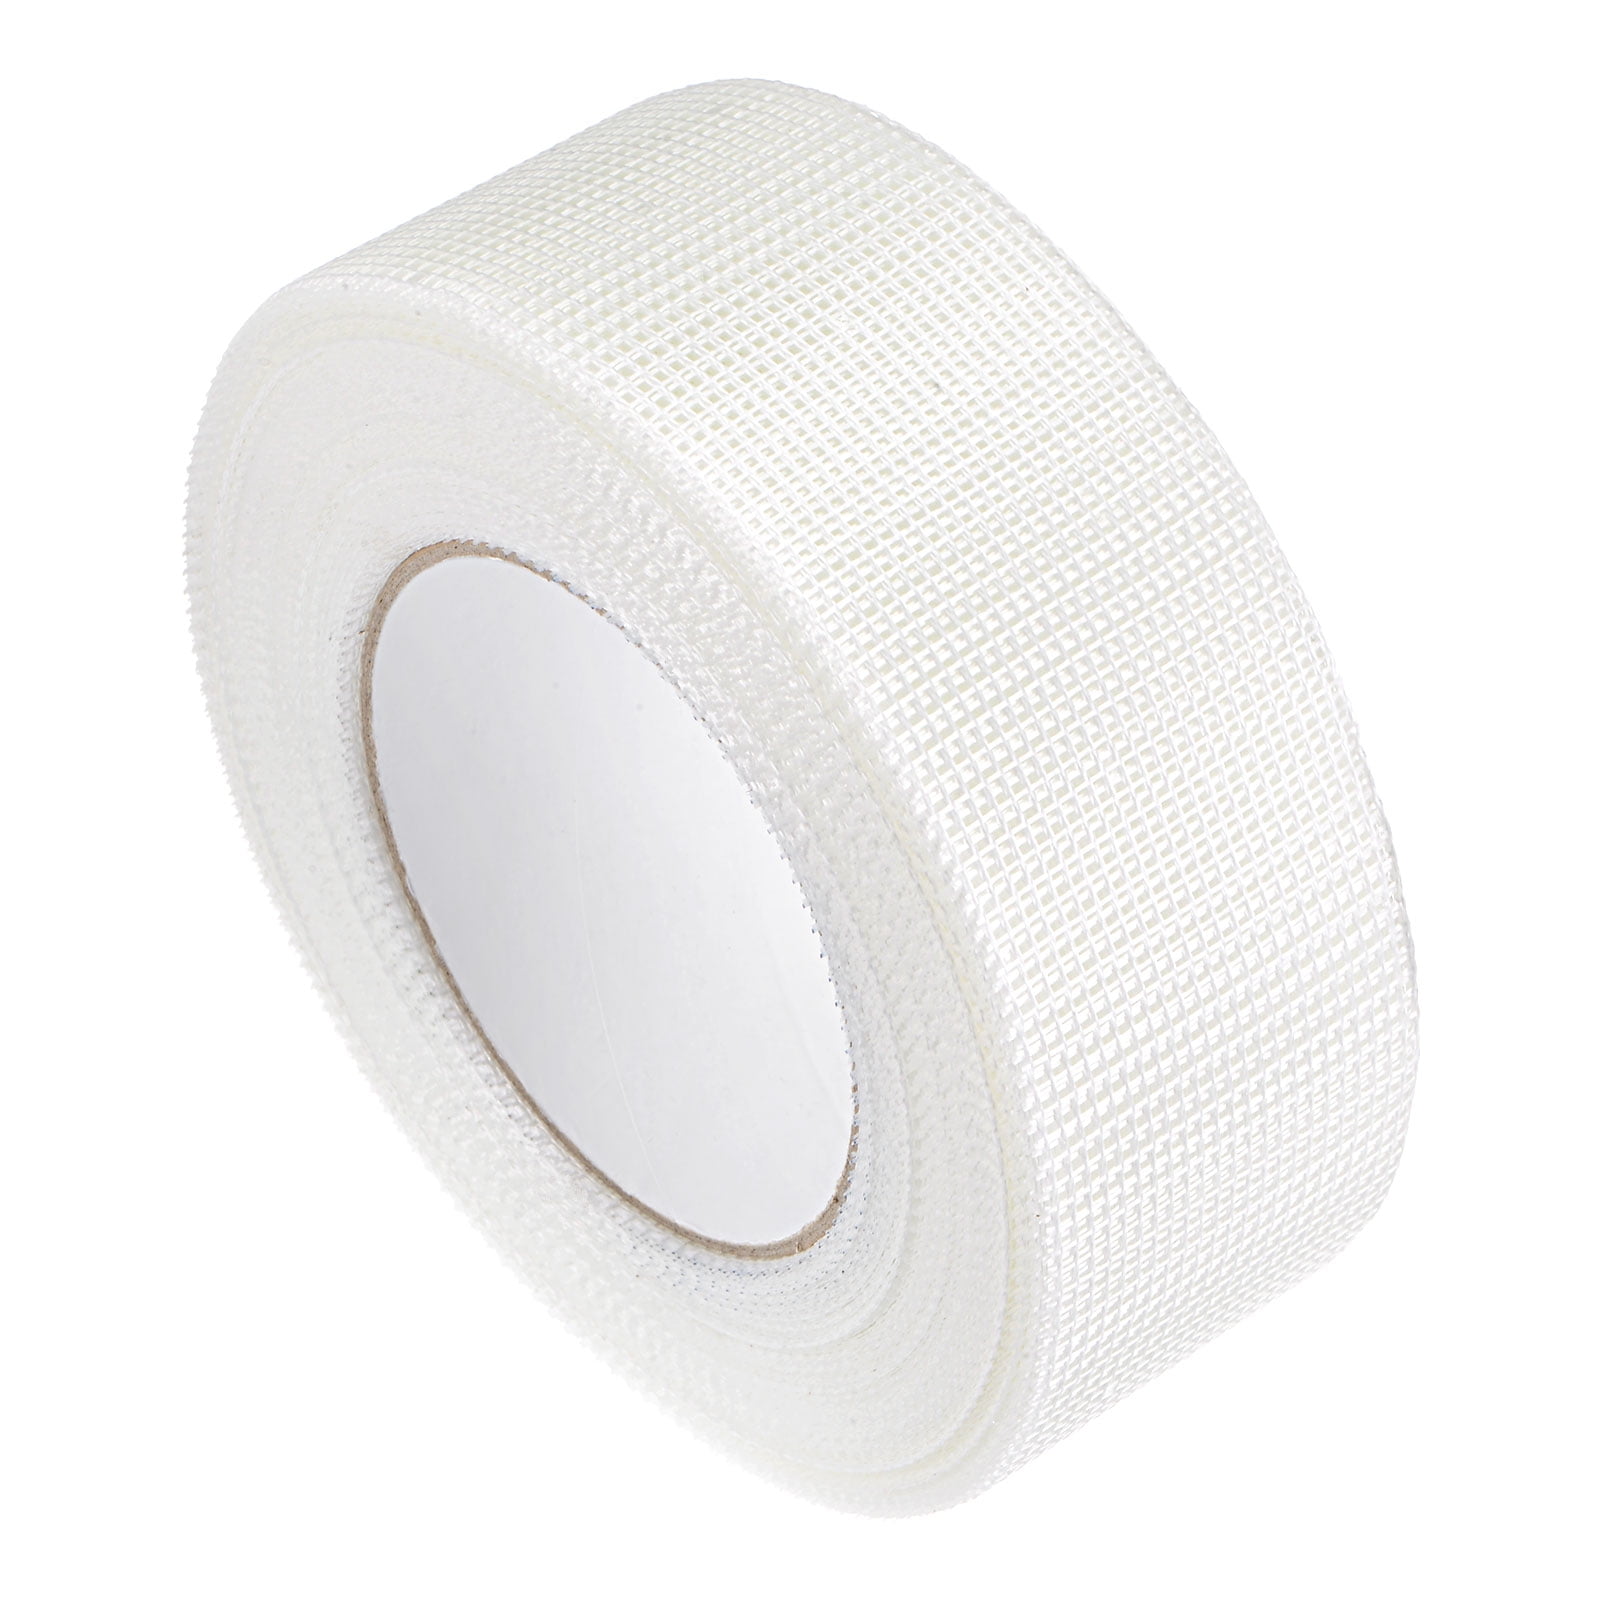 Uxcell 1-3/8 Inch x 98ft Heat Resistant High Temp Tape 2 Pack 